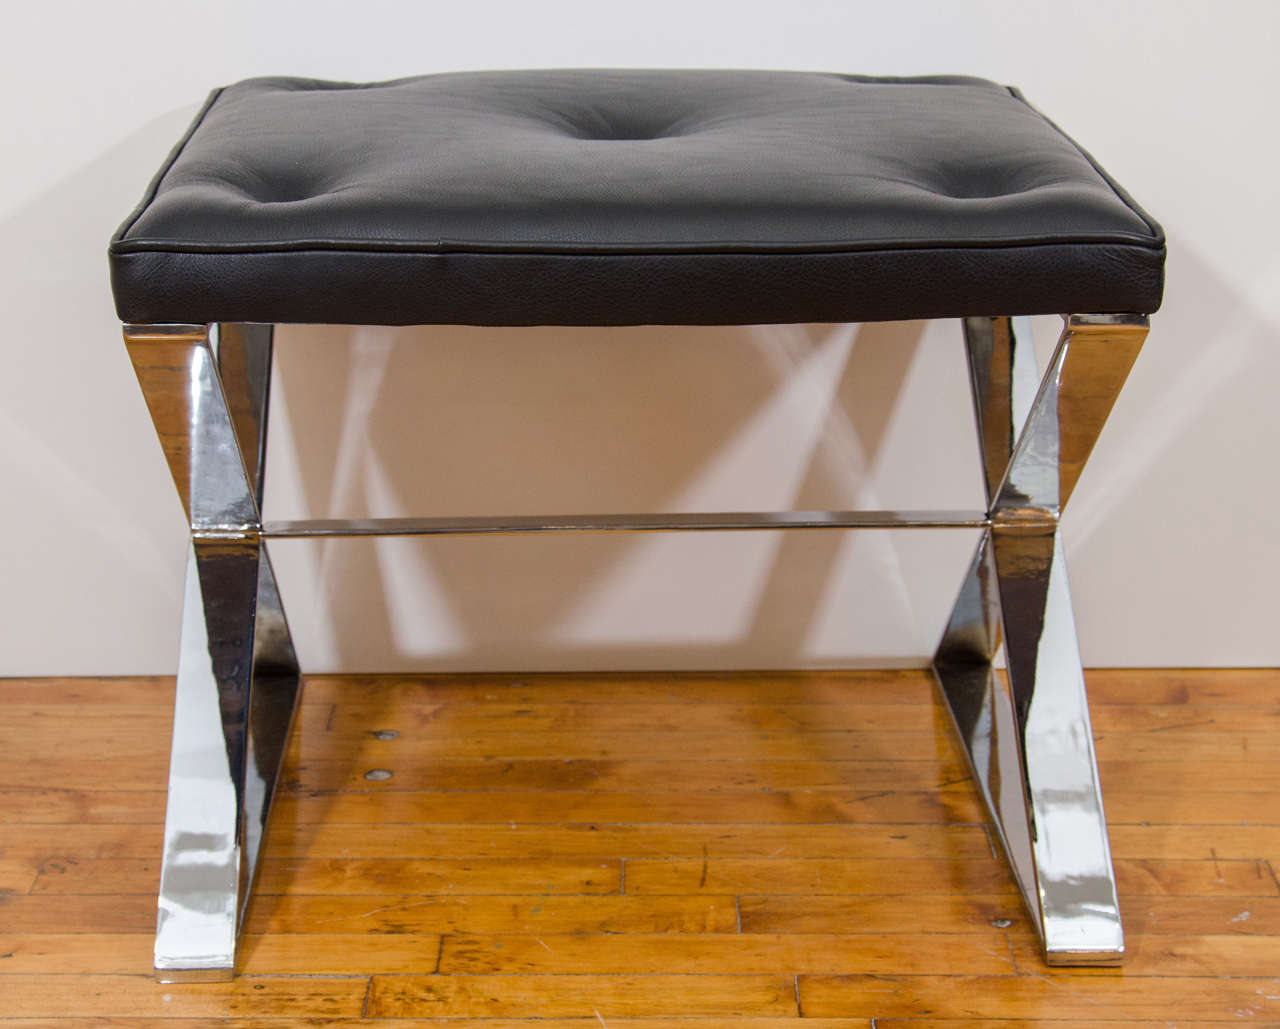 A vintage pair of Milo Baughman x-base chrome over steel benches with button tufted leather top. Newly re-upholstered.